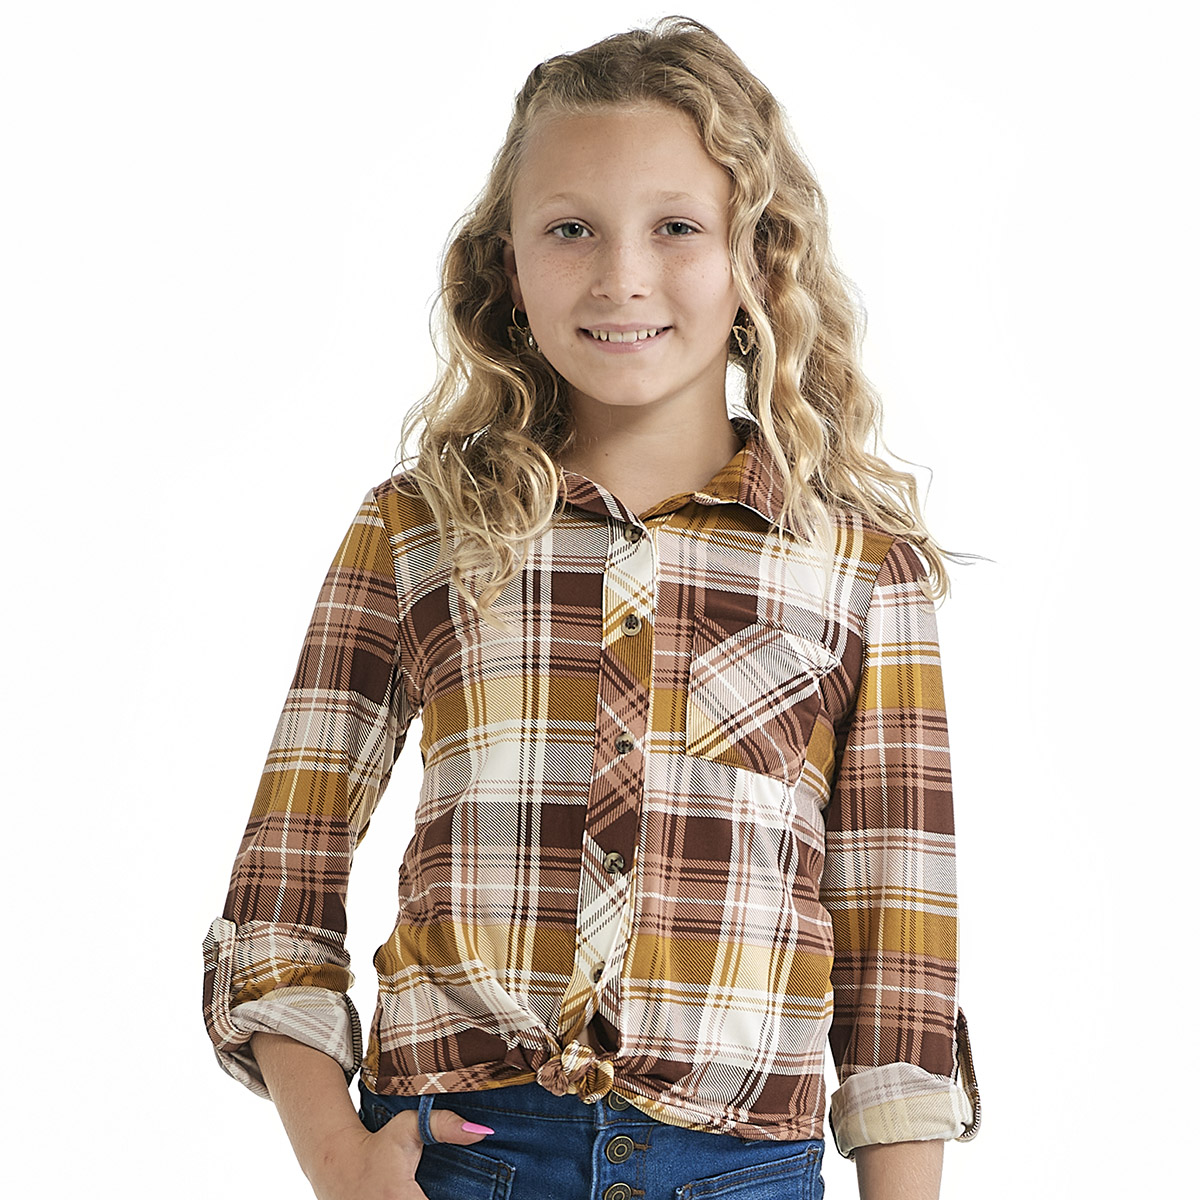 Girls (7-16) No Comment Button Down Top - Maegell Plaid